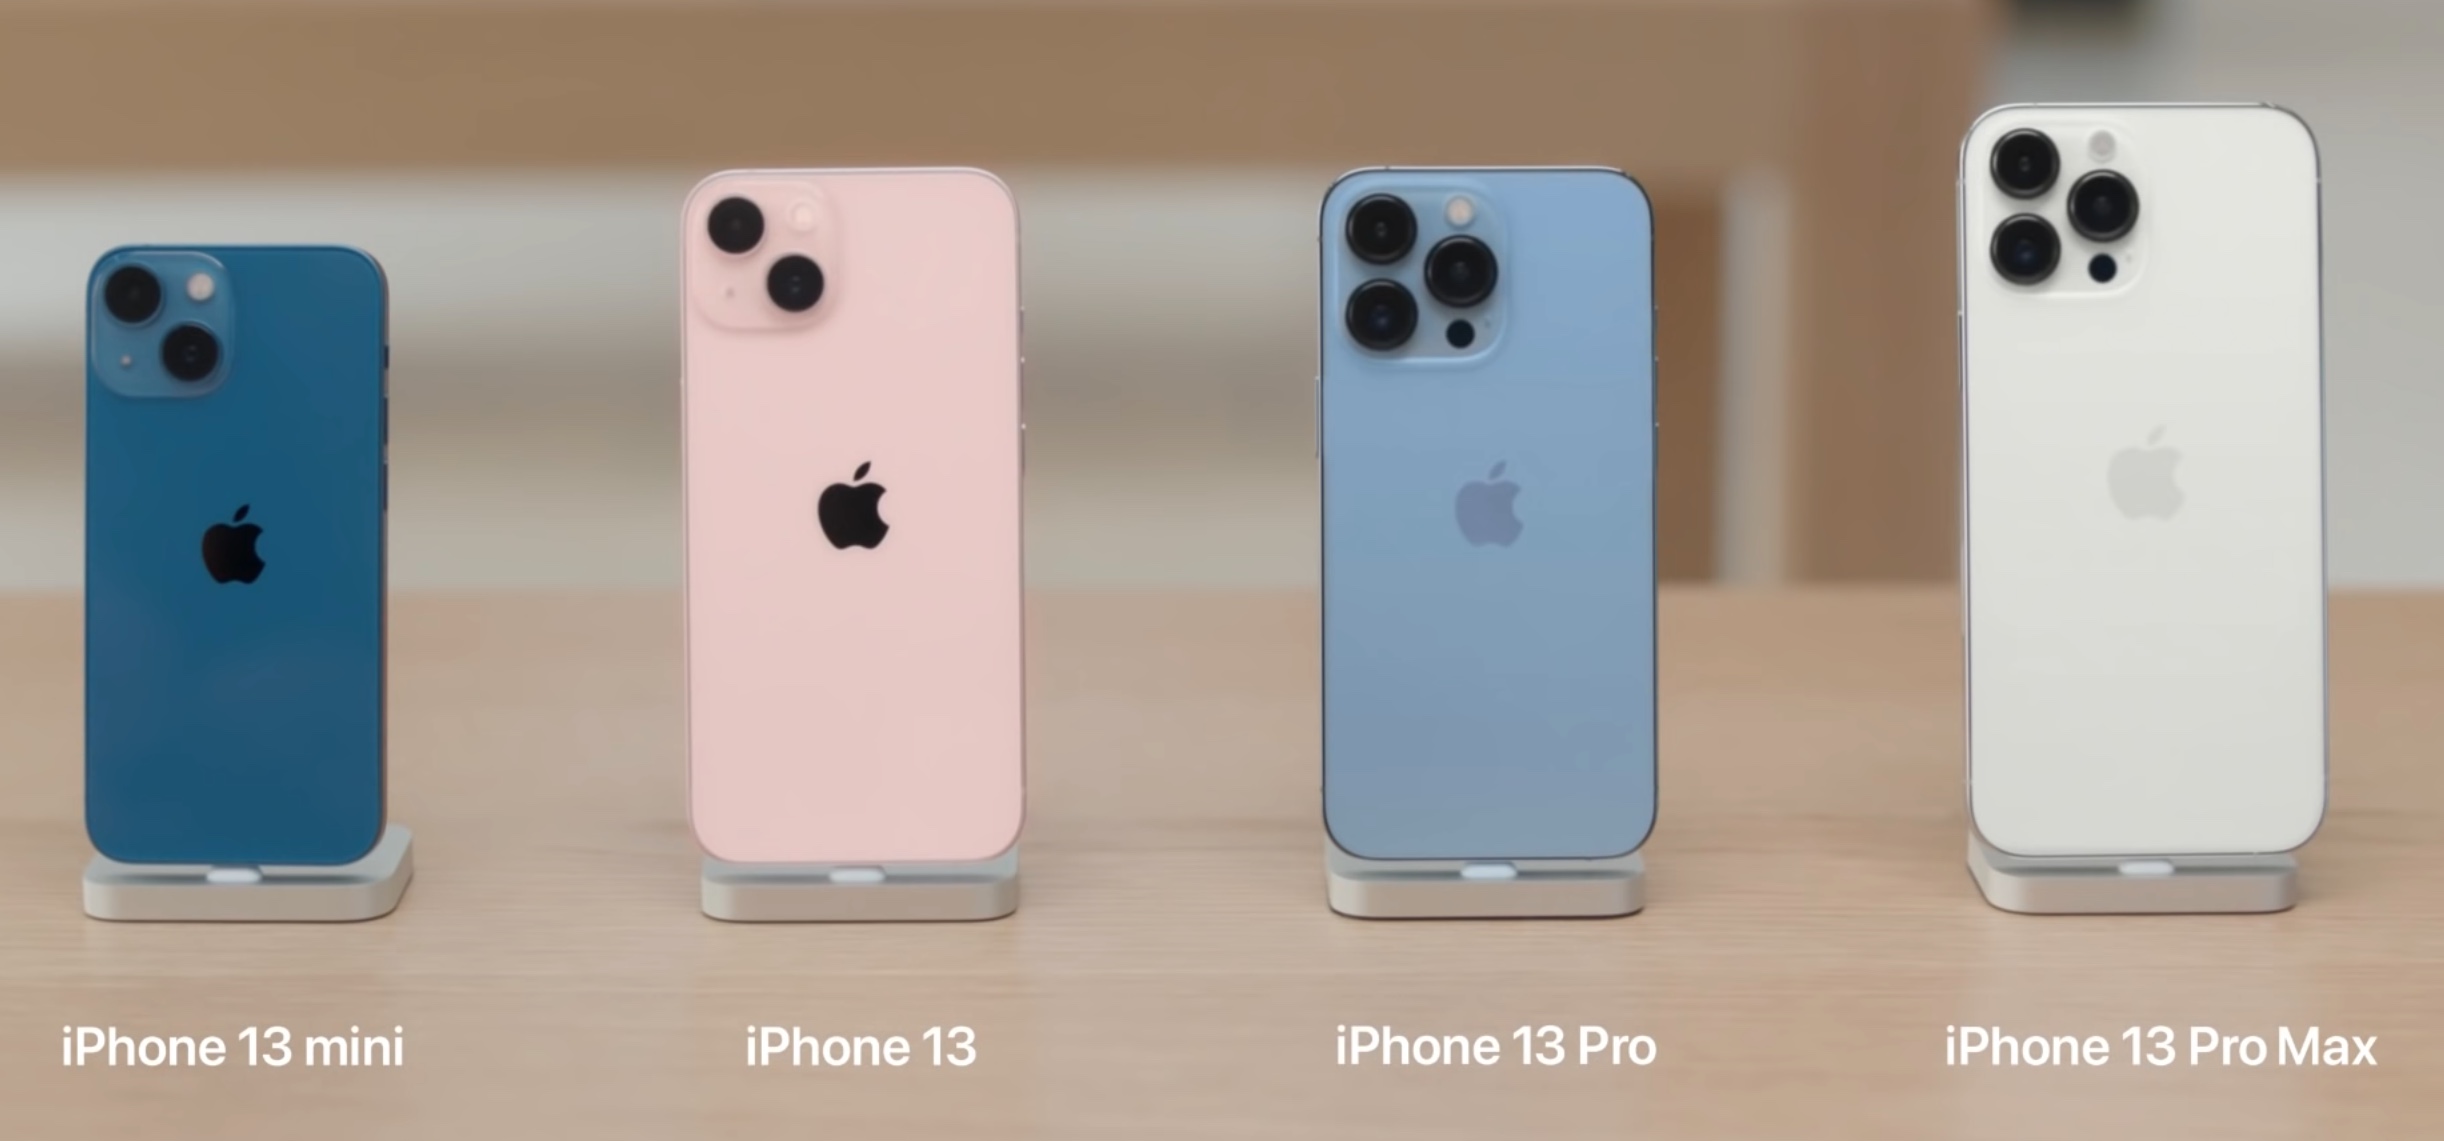 Apple iphone 13 pro colors - Juligray